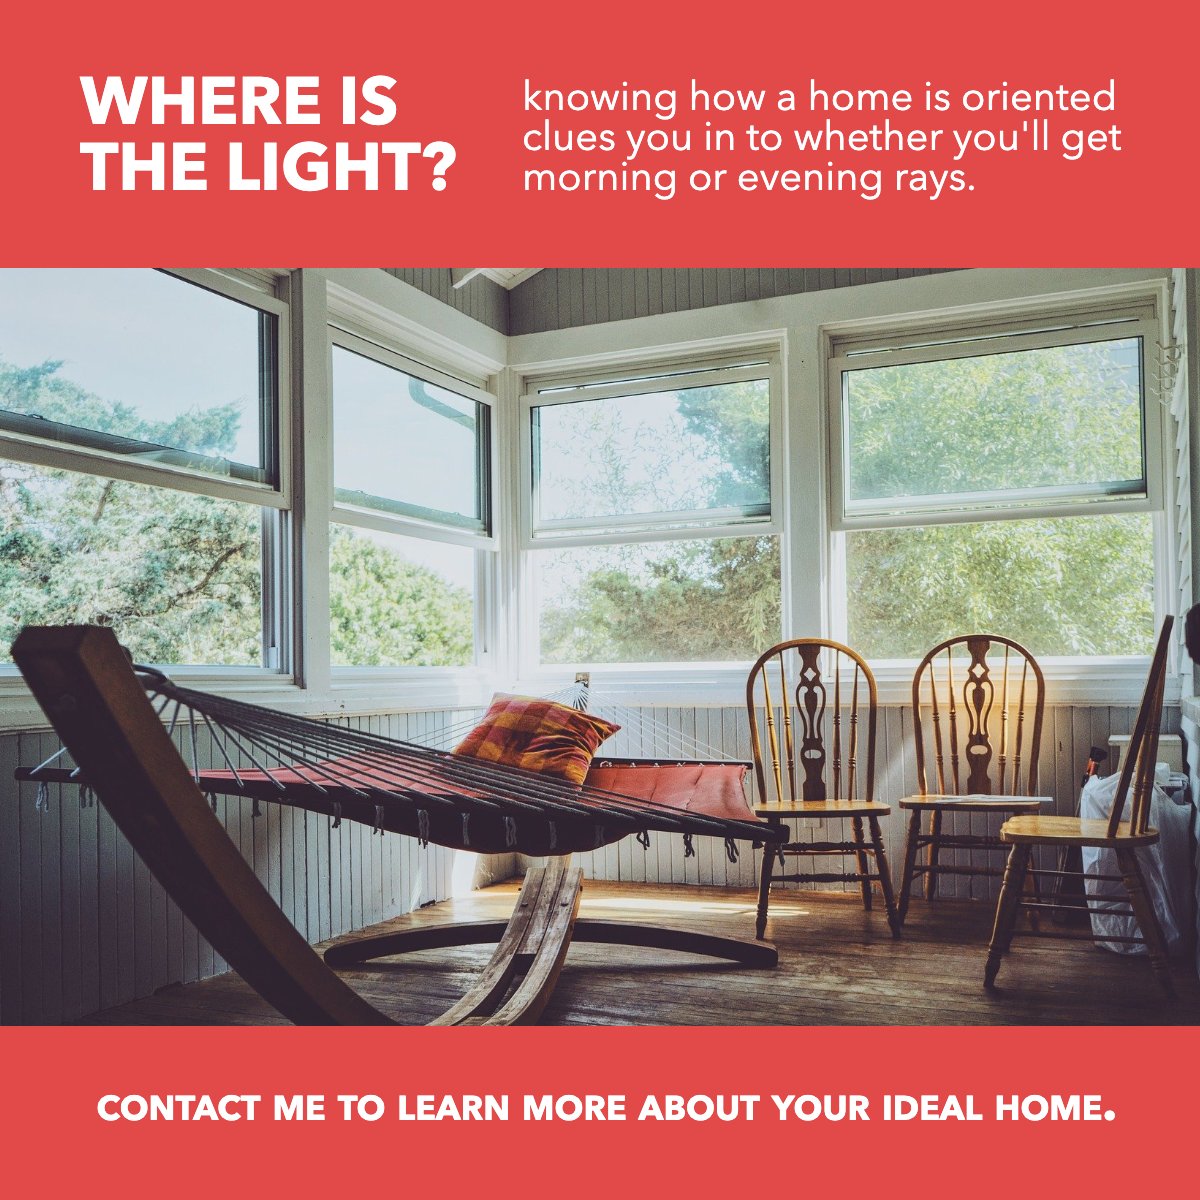 Where is the light? 🤔

Knowing how a home is oriented, clues you in to whether you'll get morning or evening rays. ☀️

#sunlight   #housegoals   #morninglight   #eveninglight
#realestate #realtor #niagara #oakville #halton #stcatharines